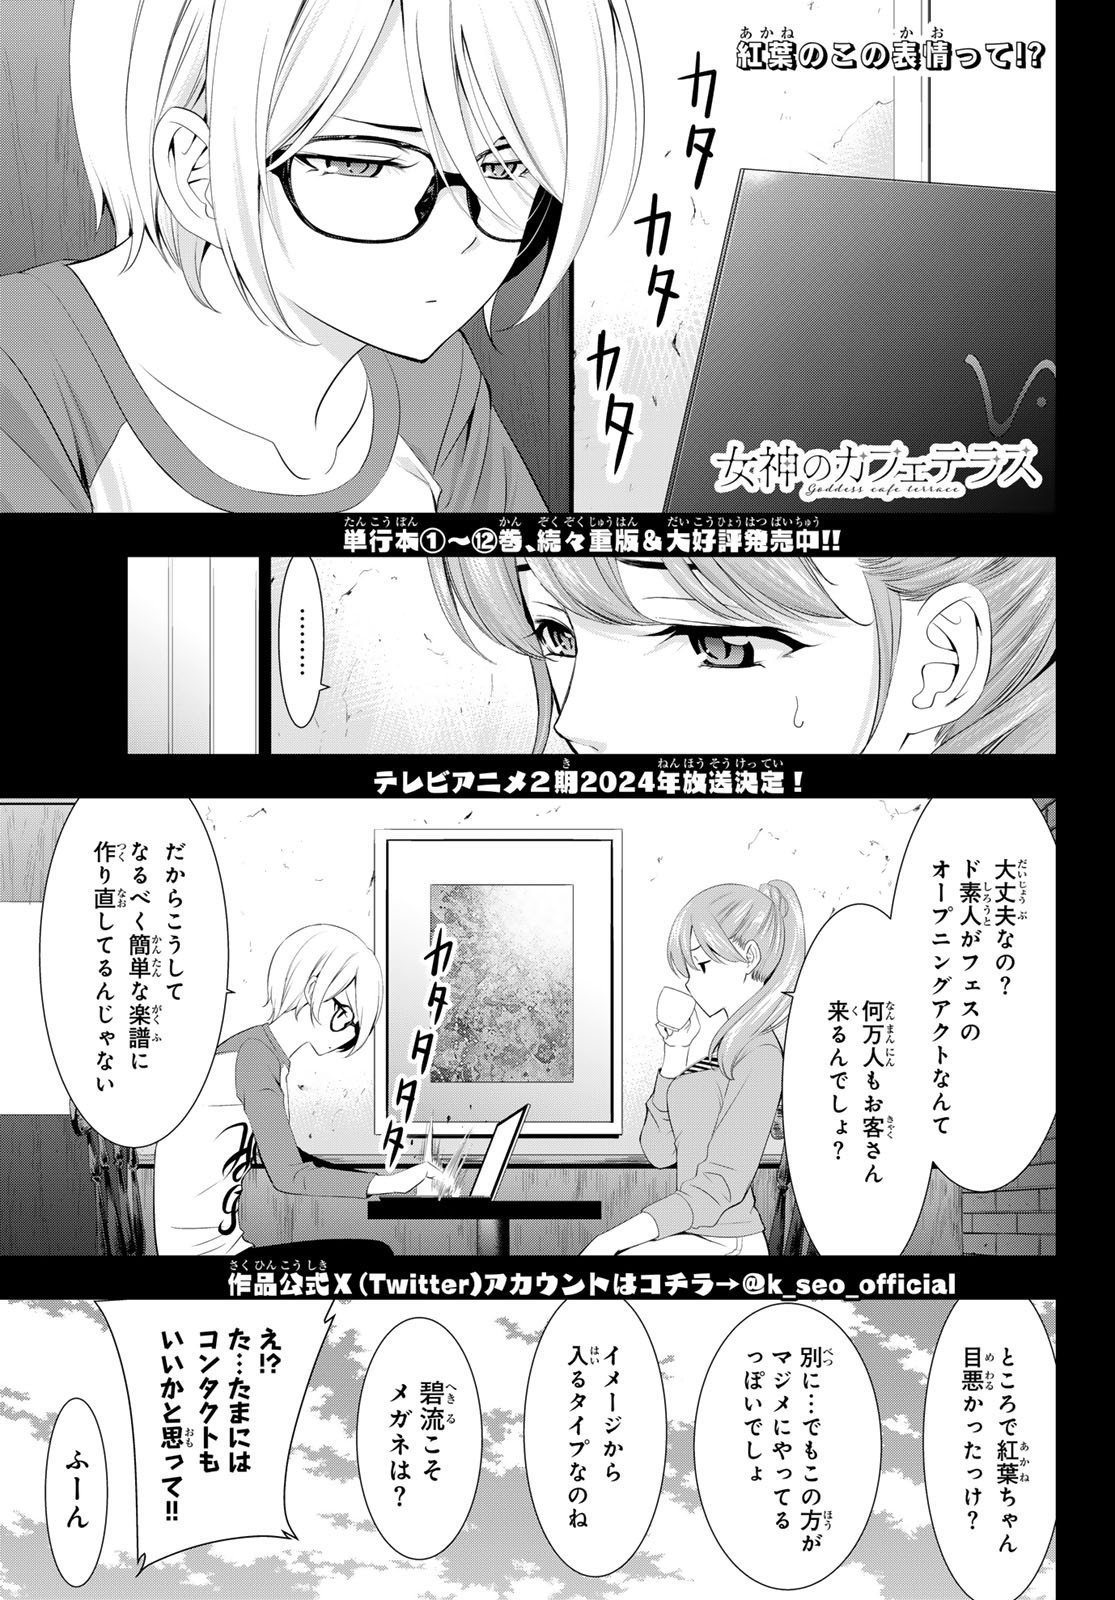 Goddess-Cafe-Terrace - Chapter 127 - Page 1